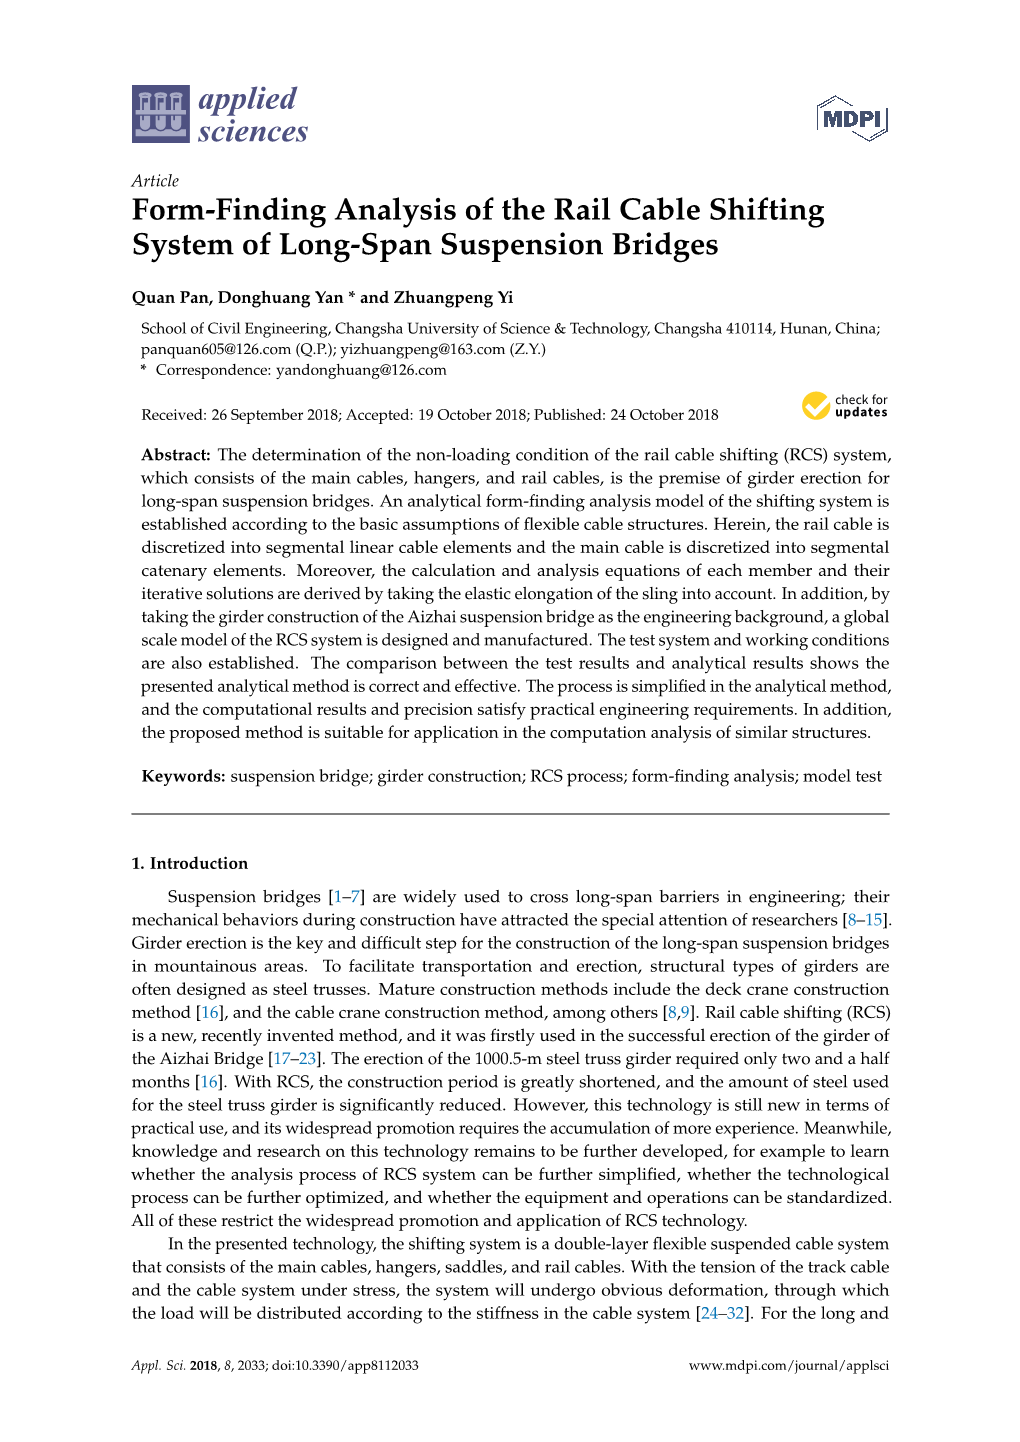 Form-Finding Analysis of the Rail Cable Shifting System of Long-Span Suspension Bridges